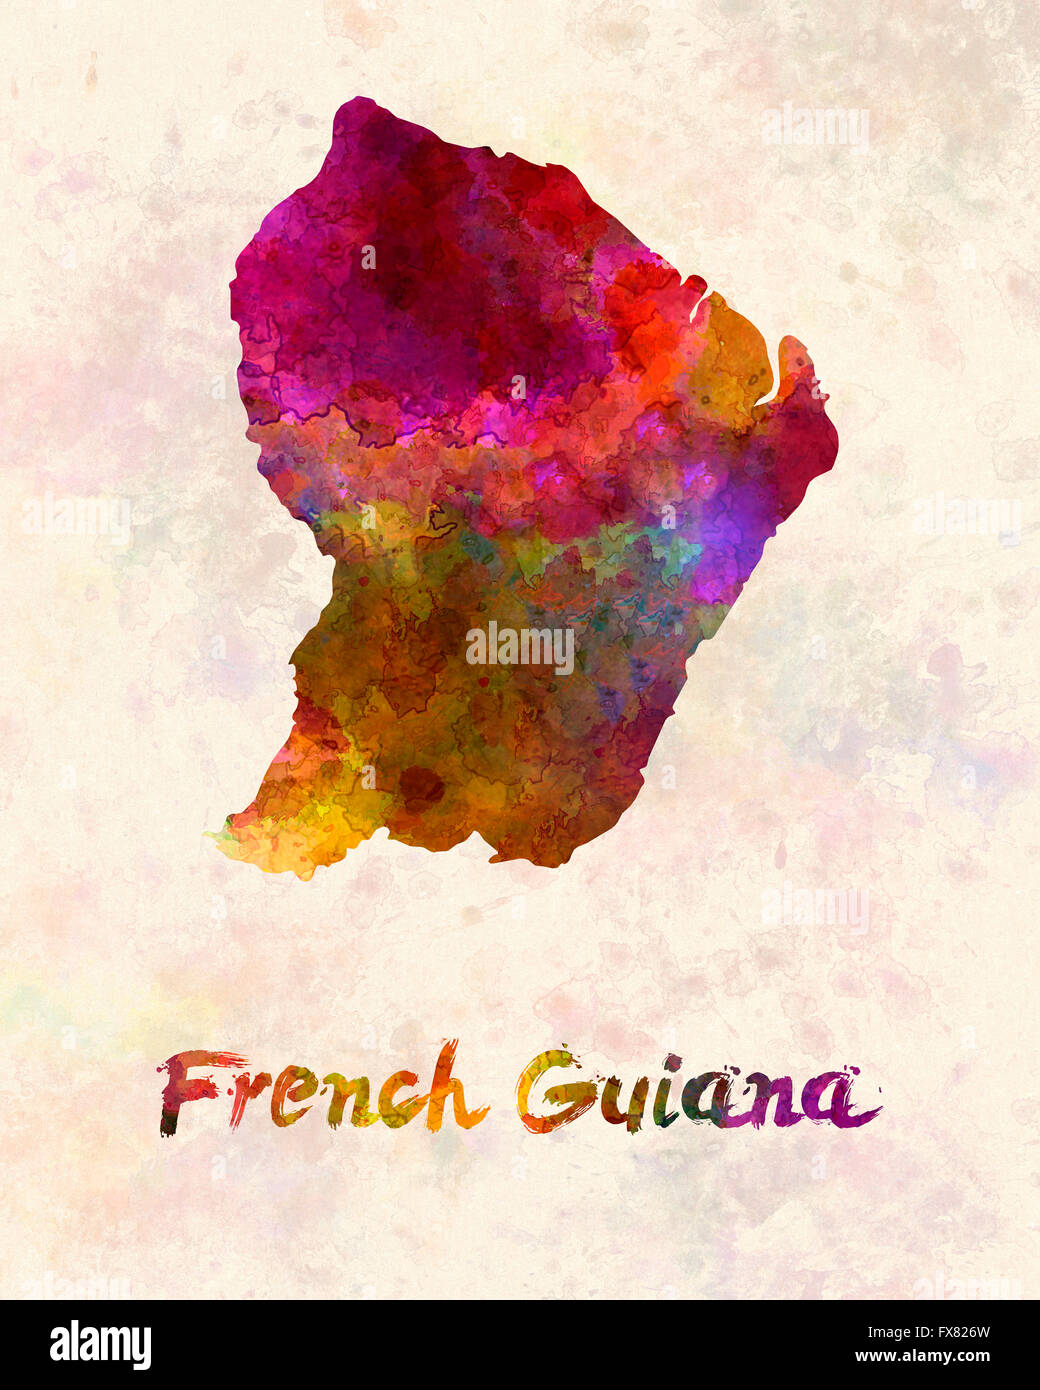 French Guiana in watercolor Stock Photo